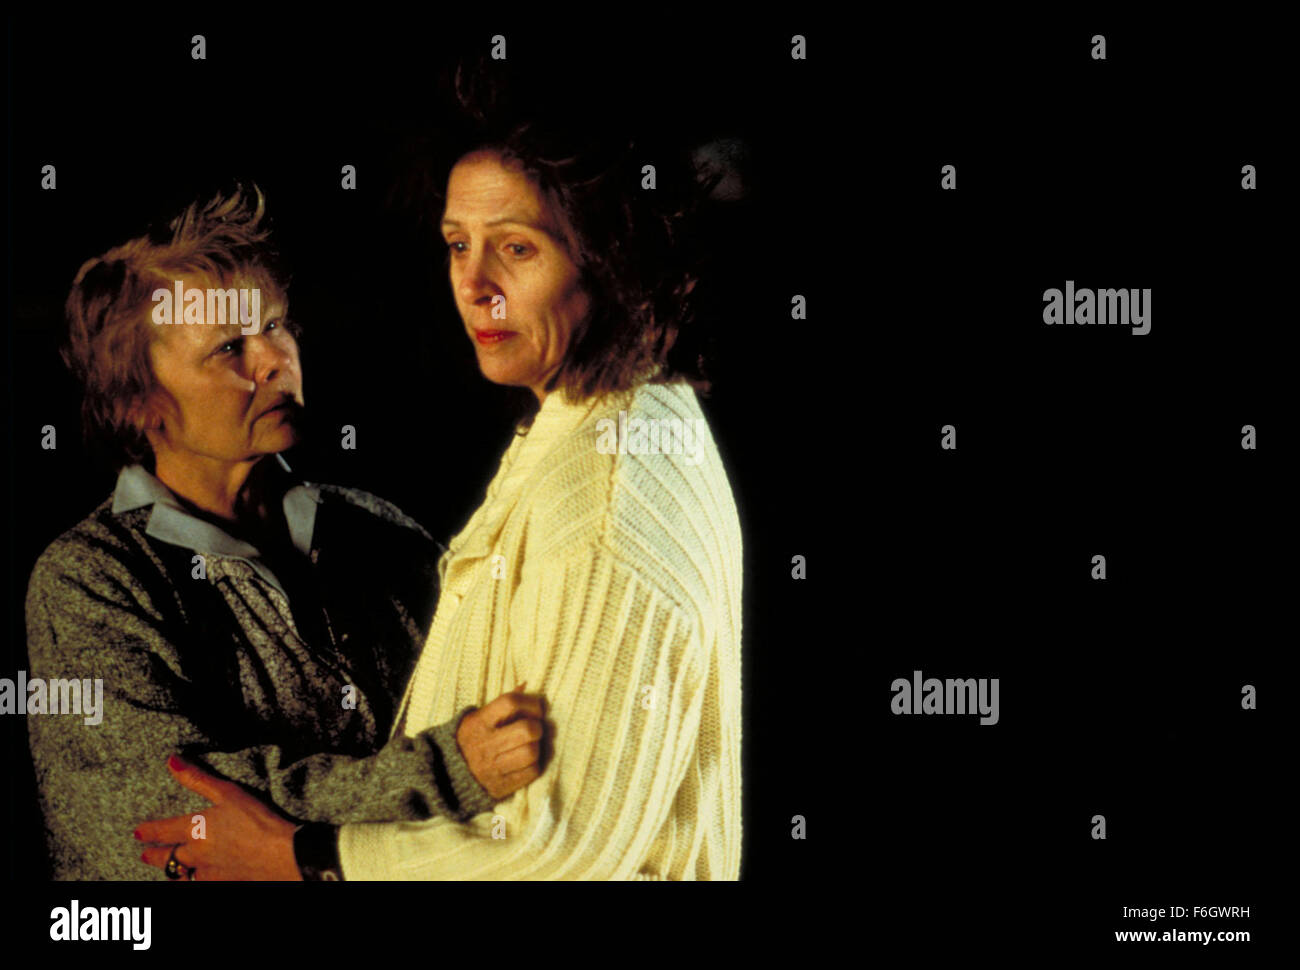 Apr 05, 2001; Hollywood, CA, USA; Image from Richard Eyre's 'Iris': an award winning recreation of the novel and life of Iris Murdoch starring JUDI DENCH as Iris Murdoch and PENELOPE WILTON as Janet Stone. Stock Photo